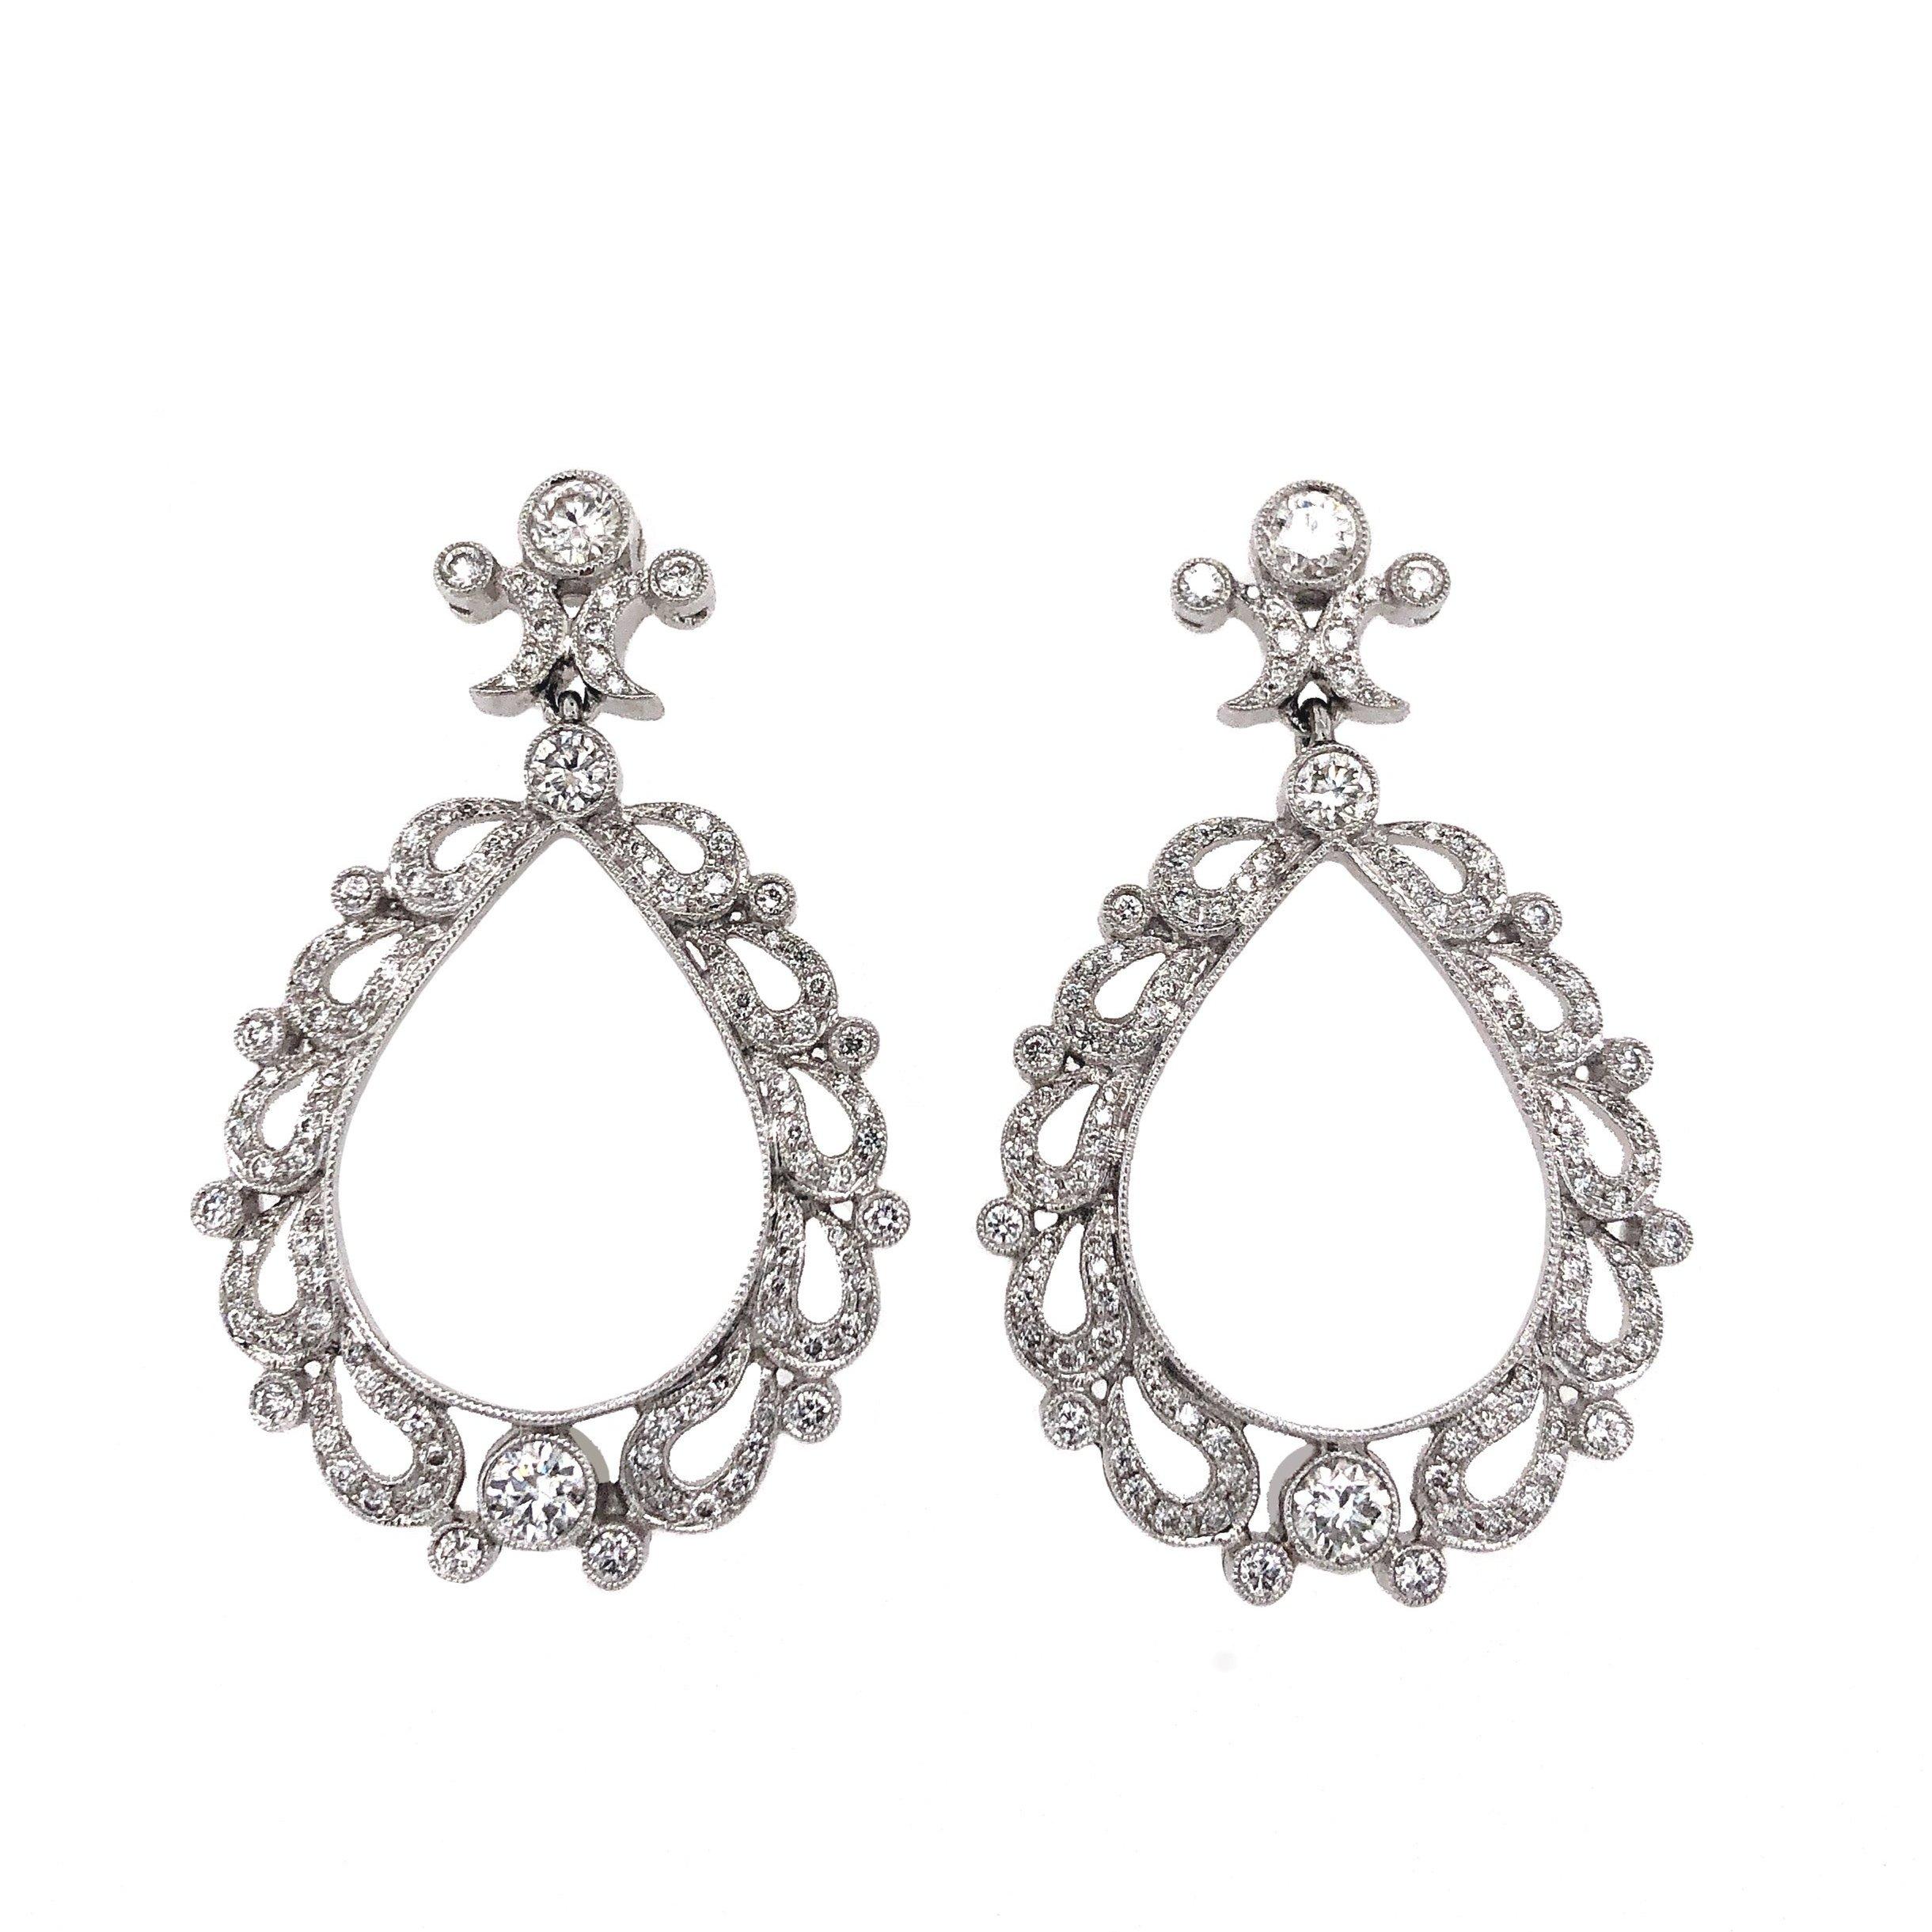 Crafted from 18K White Gold, these Pear Shaped Chandelier Drop Earrings flaunt Pavé Diamonds and Round Brilliant Diamonds totaling 1.99 carats. The diamonds are deemed F in Color and VS in Clarity with excellent make and polish. The ornate design